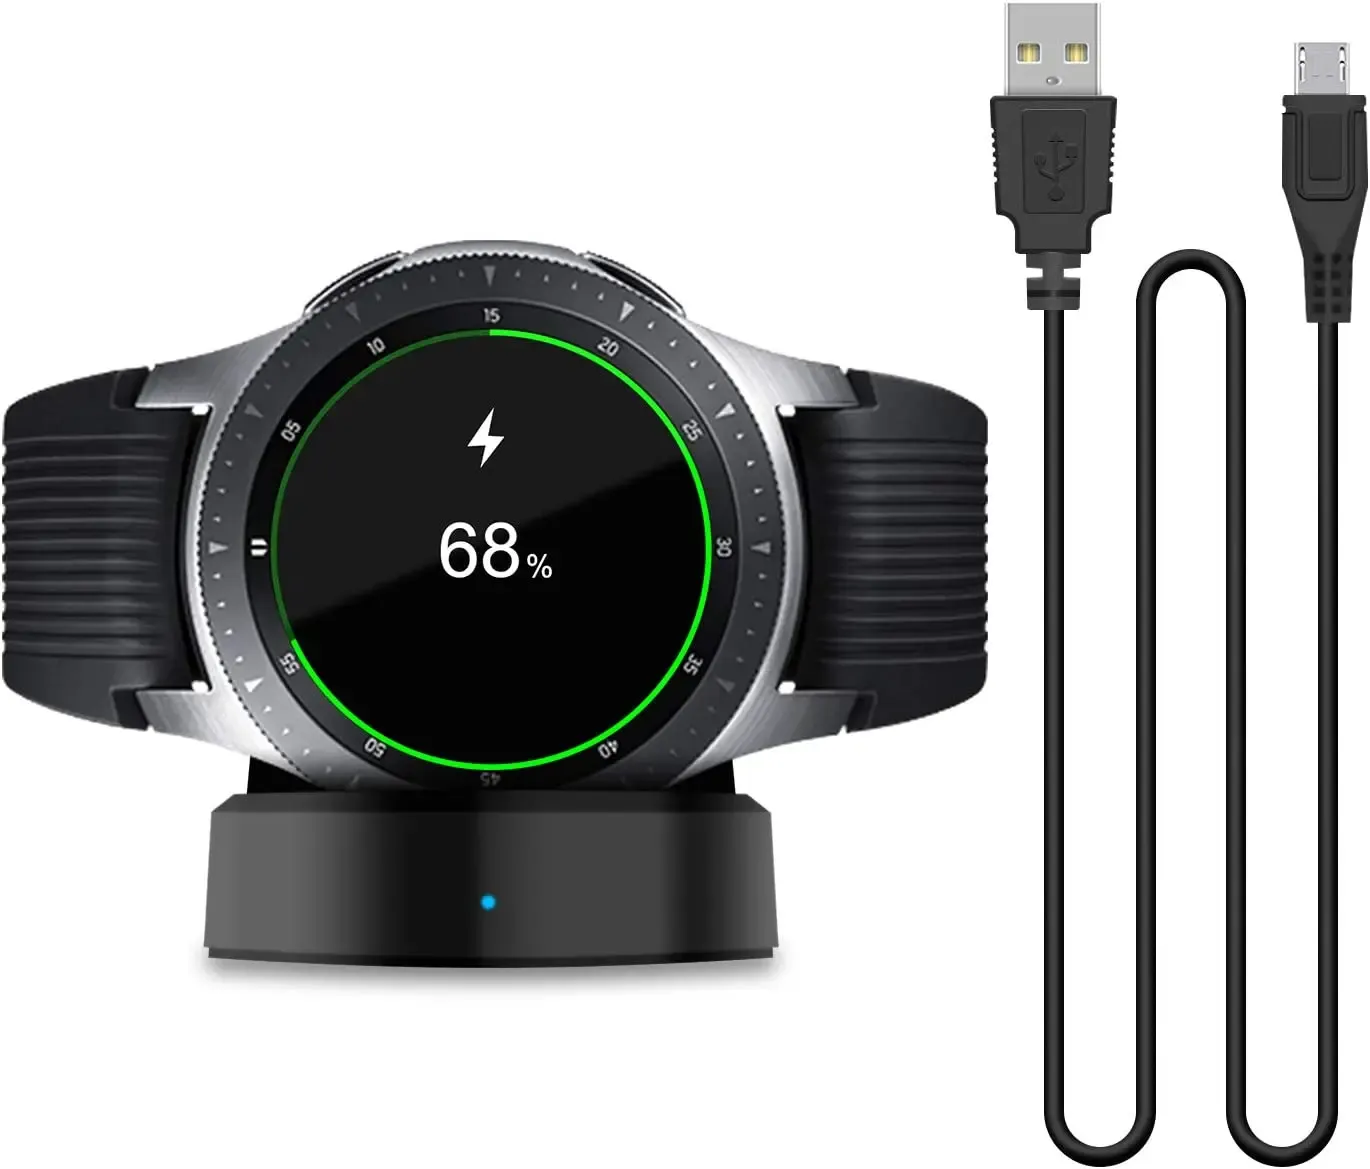 Chargers Wireless Fast Charger Base For Samsung Gear S3 S2 Frontier Watch Charging Cable For Samsung Galaxy Watch S3 S2 46mm 42mm Charger